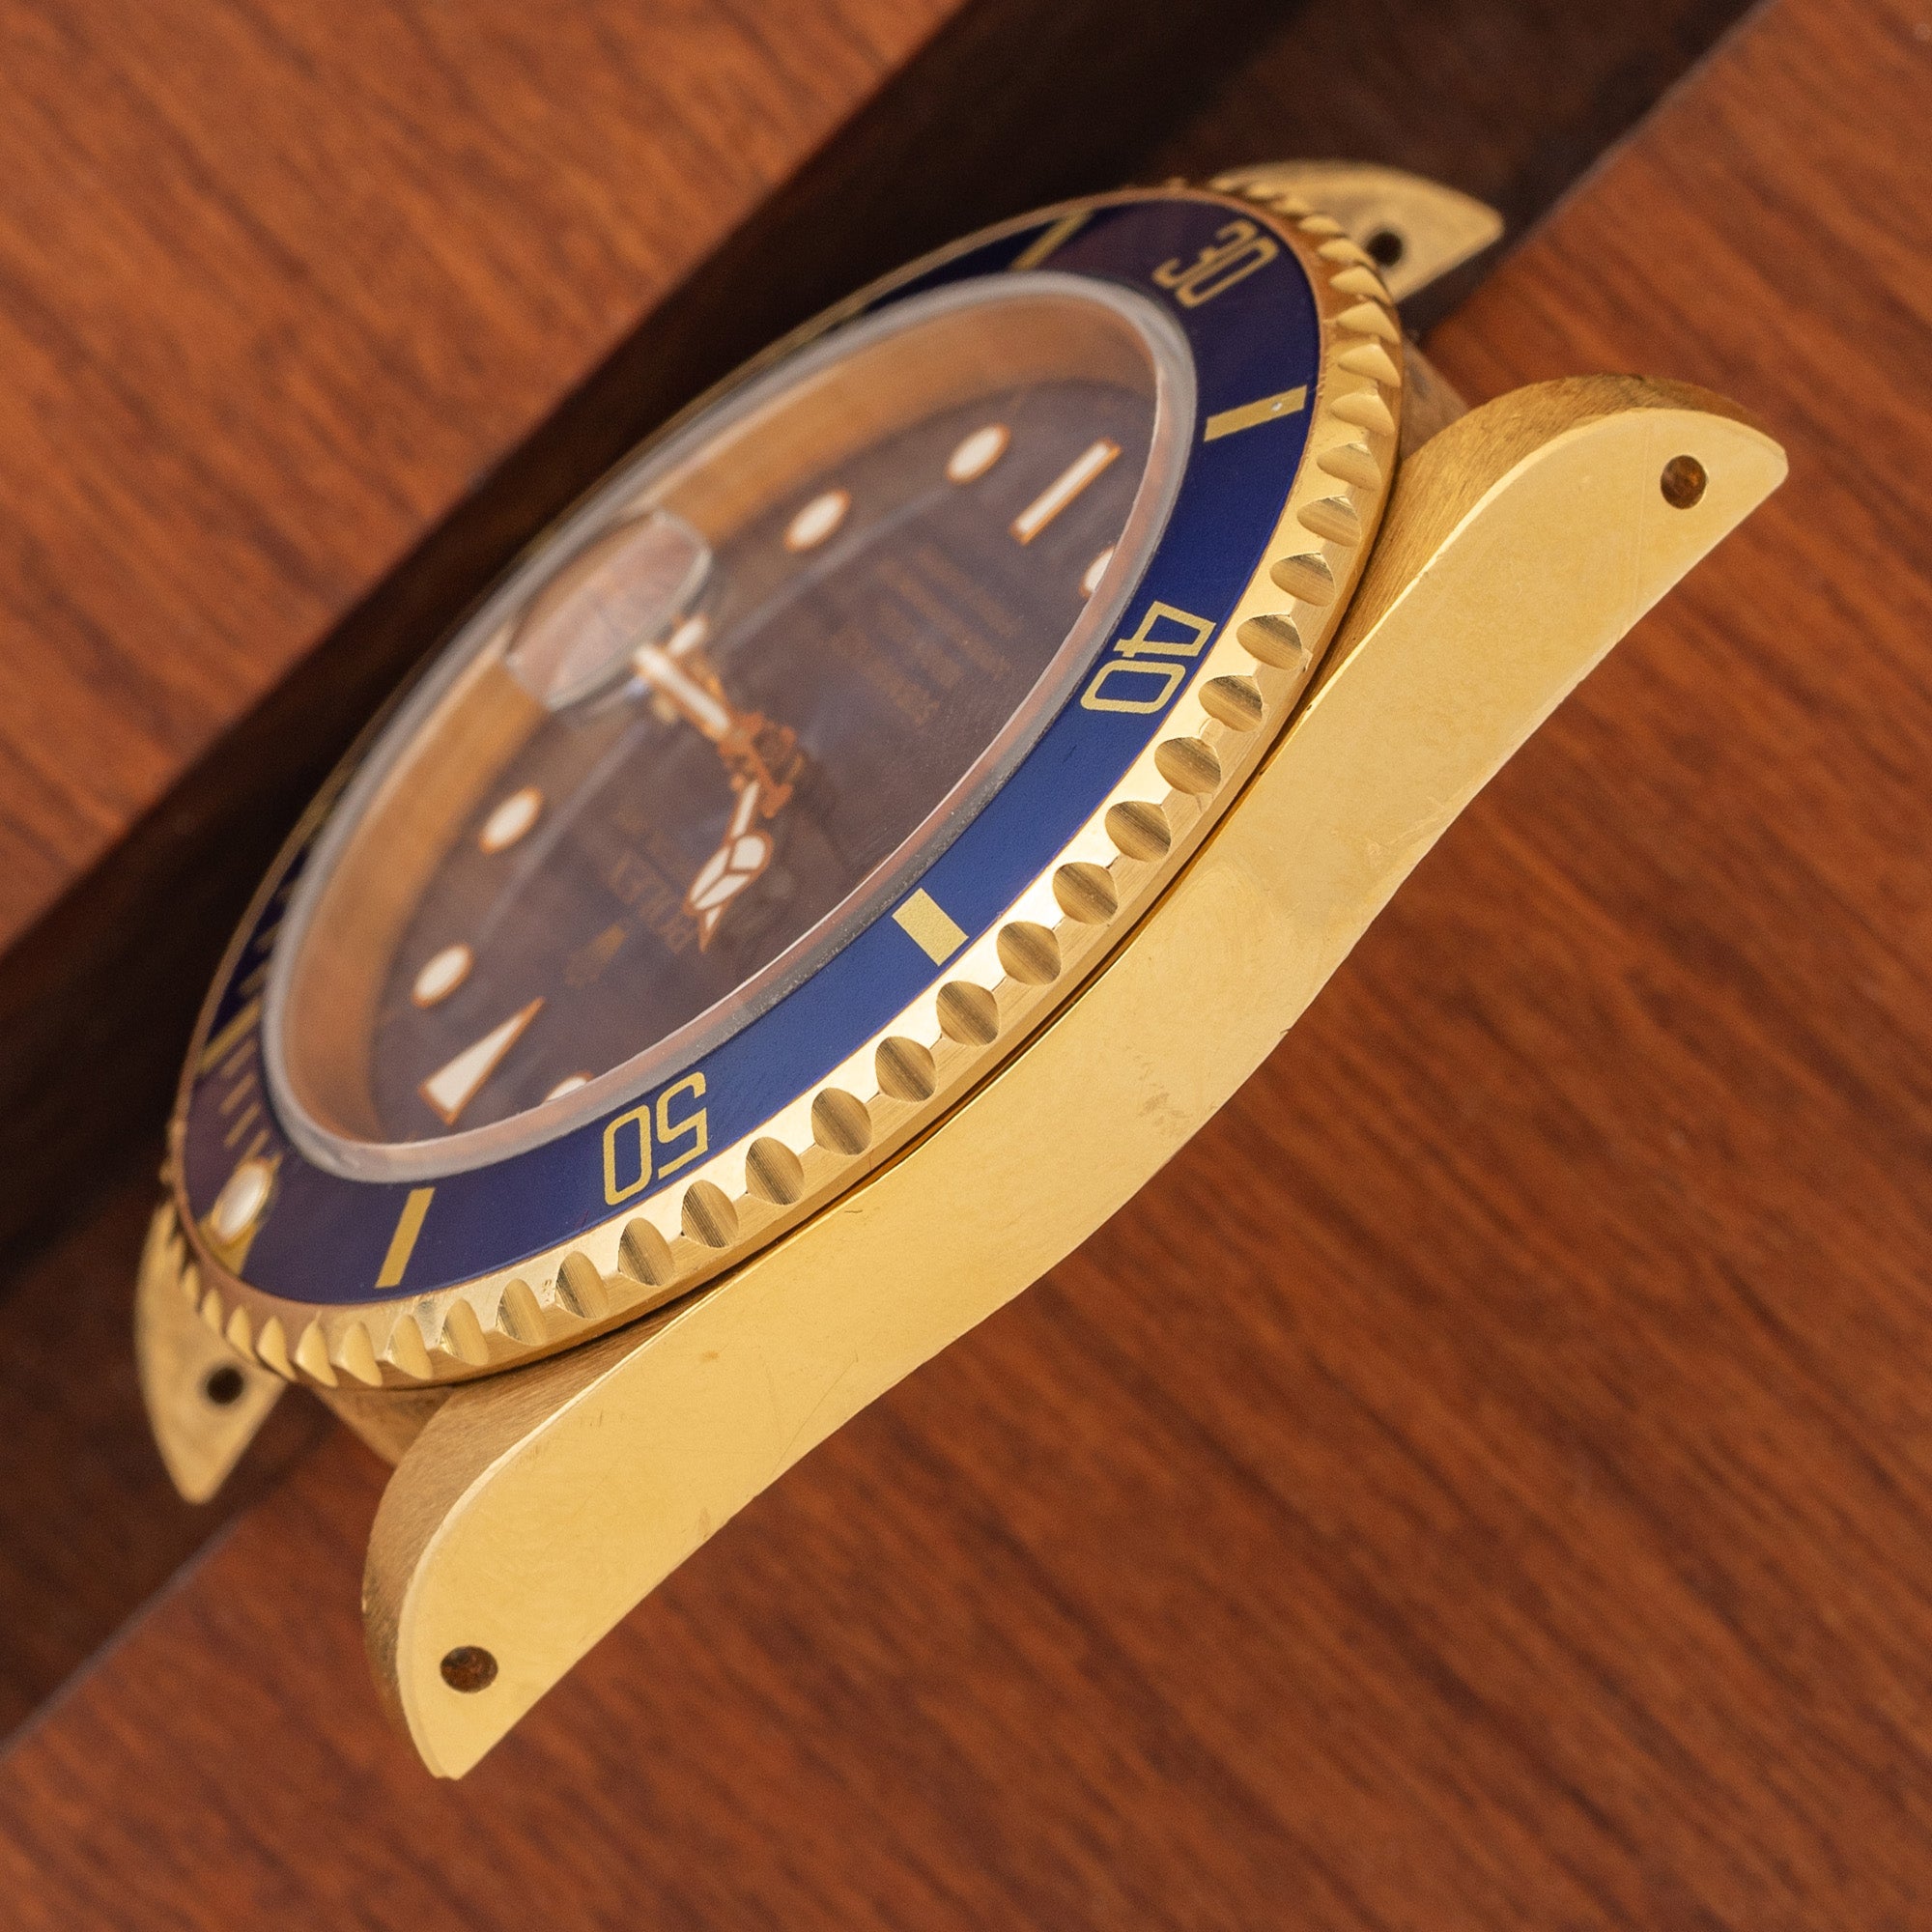 Rolex Submariner 16618 Yellow Gold w/Box & Booklets - *Unpolished*